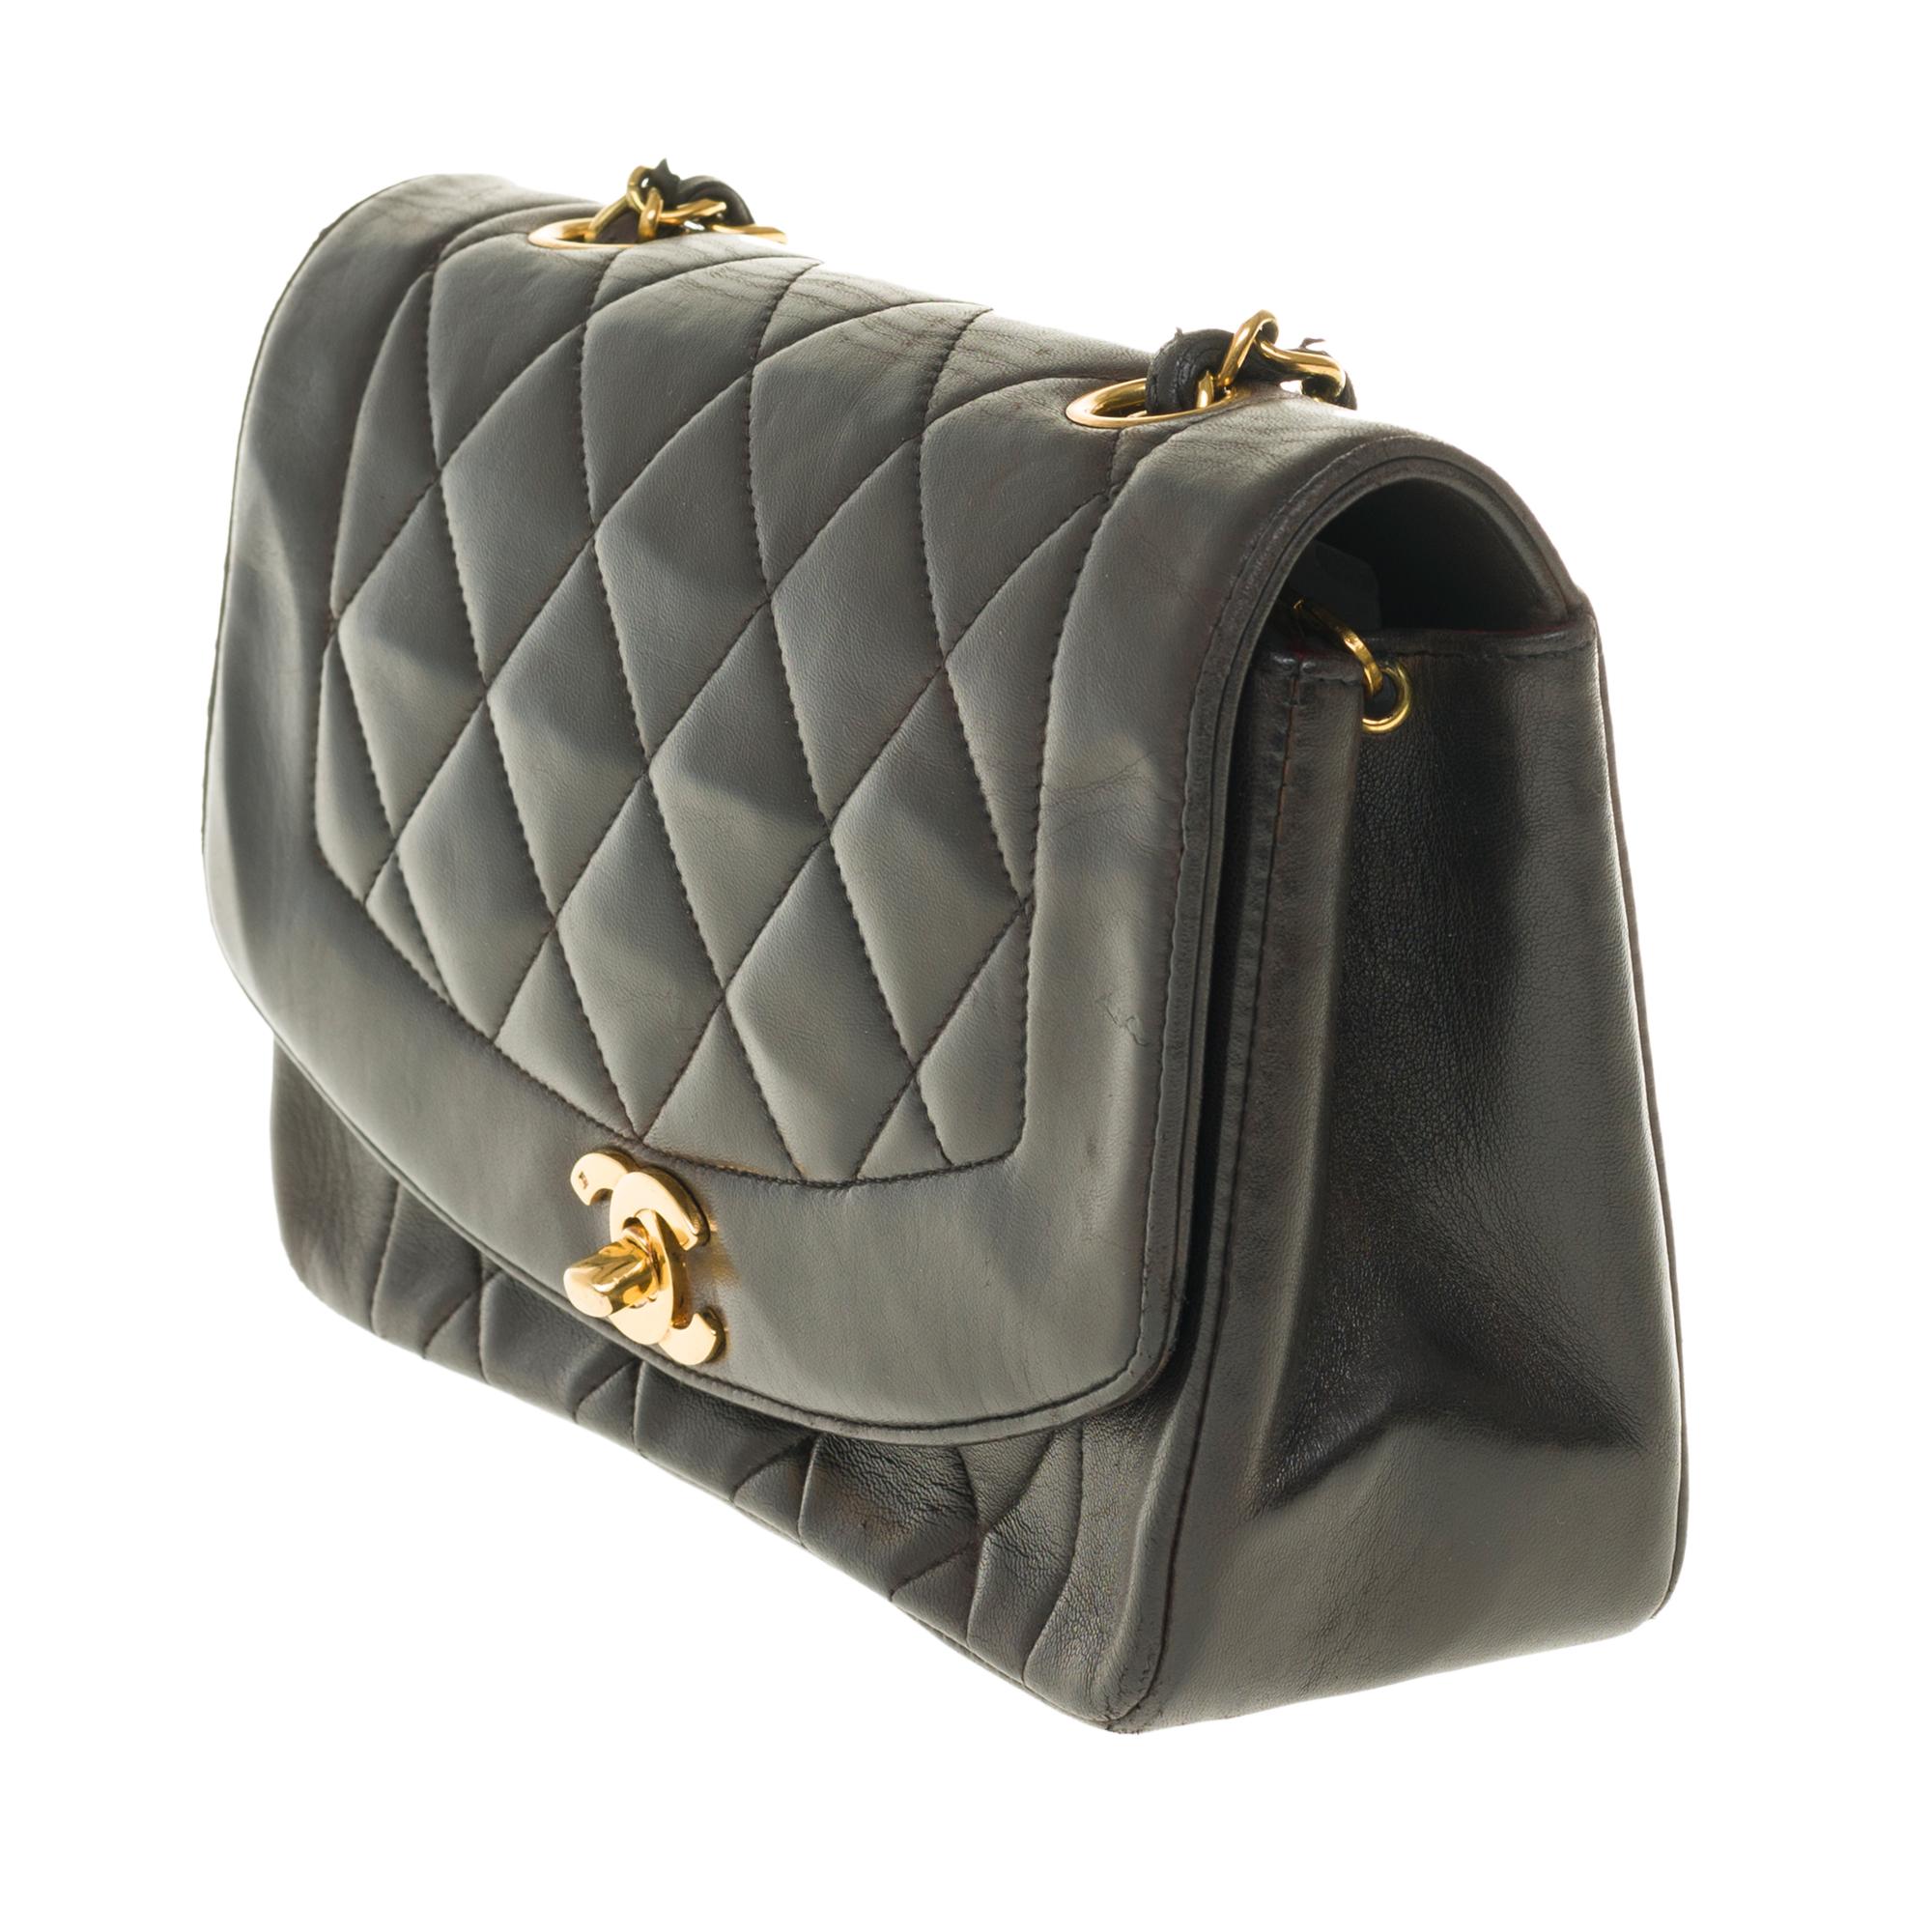 Black Stunning Chanel Diana Shoulder bag in black quilted lambskin with gold hardware